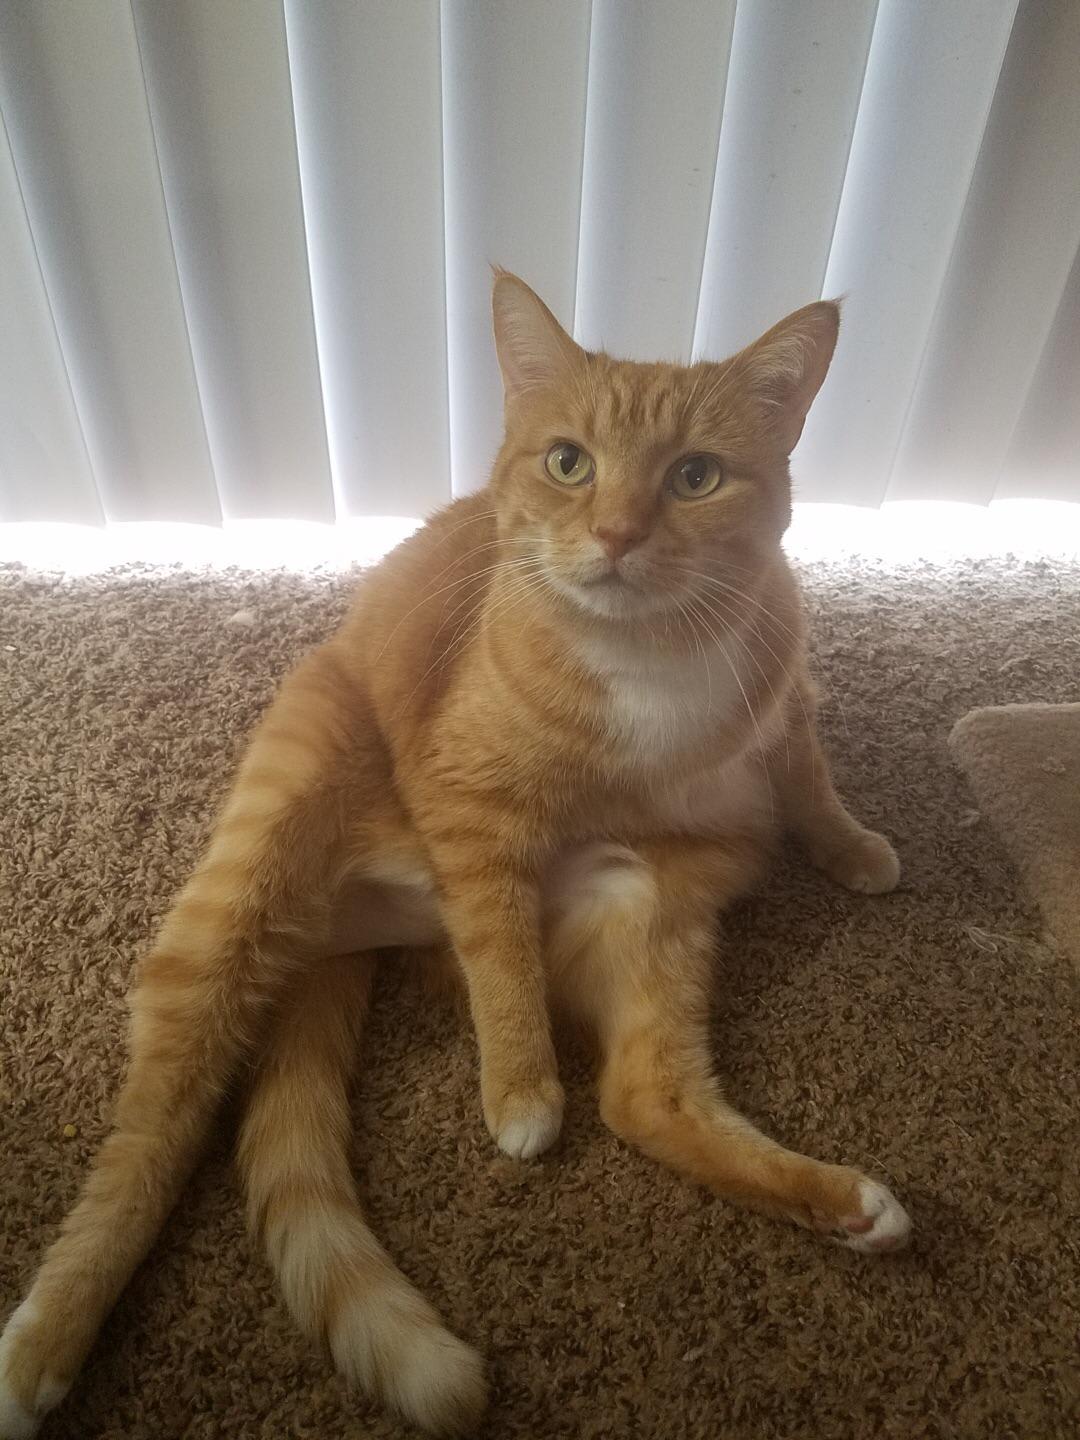 This is Fry, the chonkiest of our three kitties. His hobbies include: hiding under the bed (where he's not supposed to be), eating any and all food put in front of him, and sucker punching his brother.